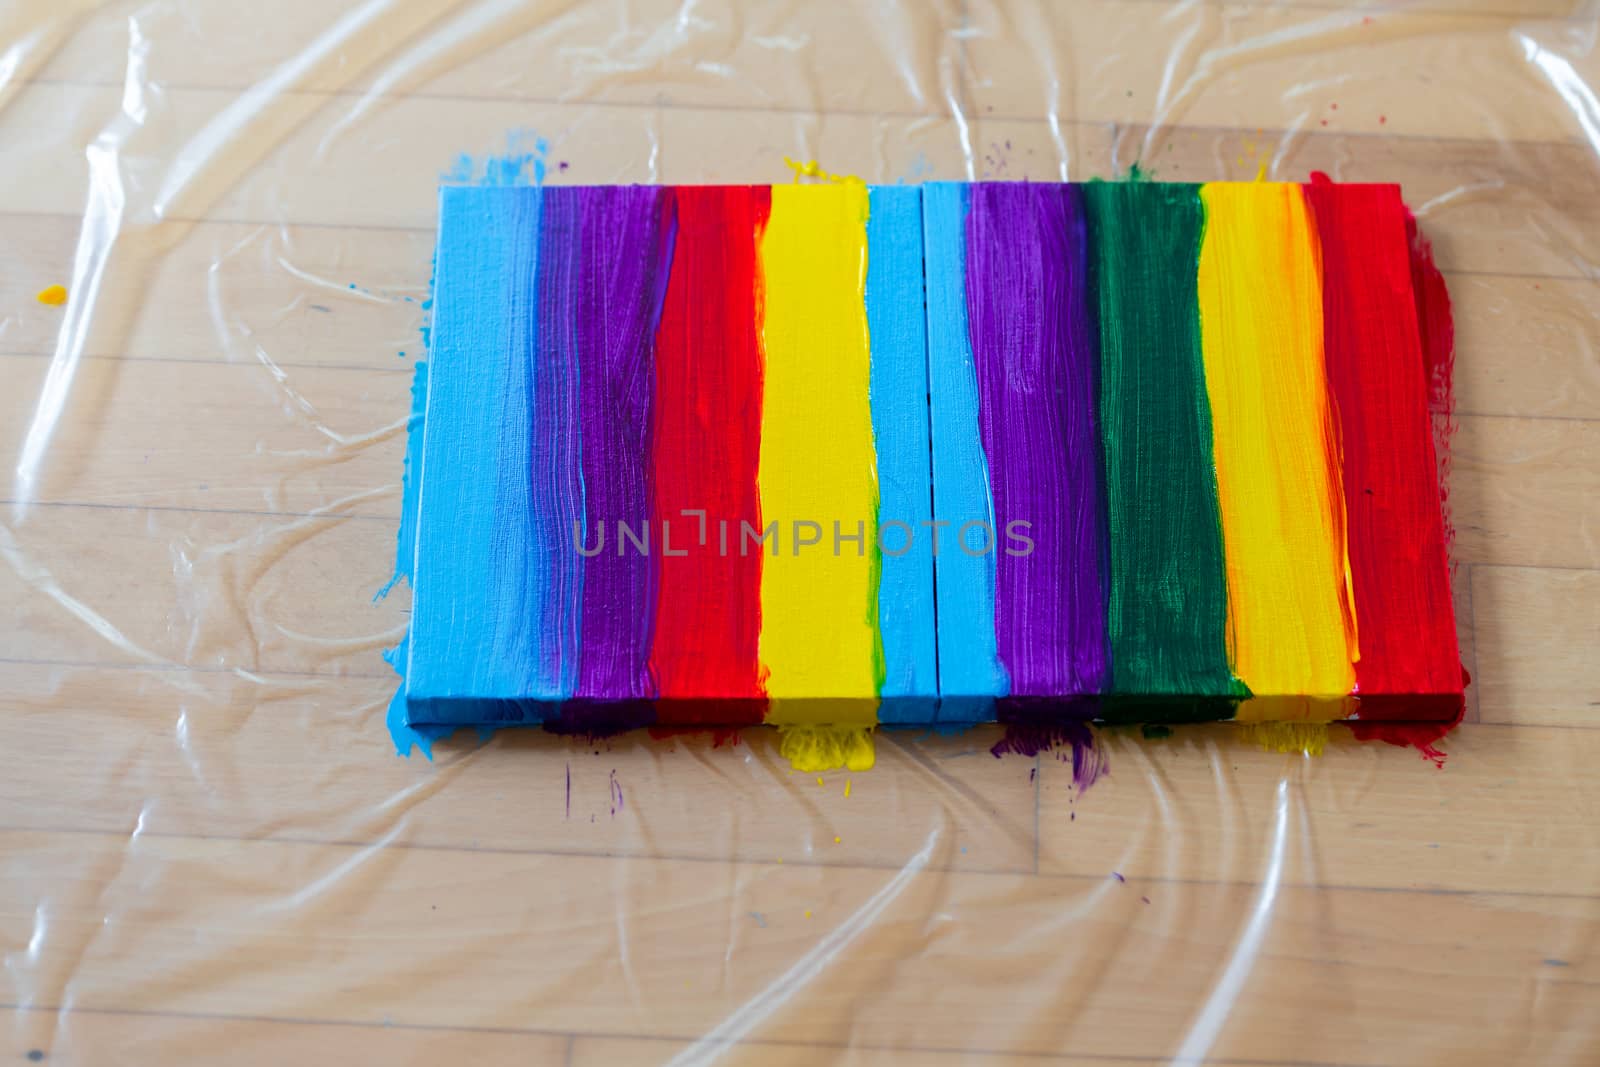 Rainbow on canvas painted with colorful pattern, nobody, close up, acrylic colors, DIY crafts